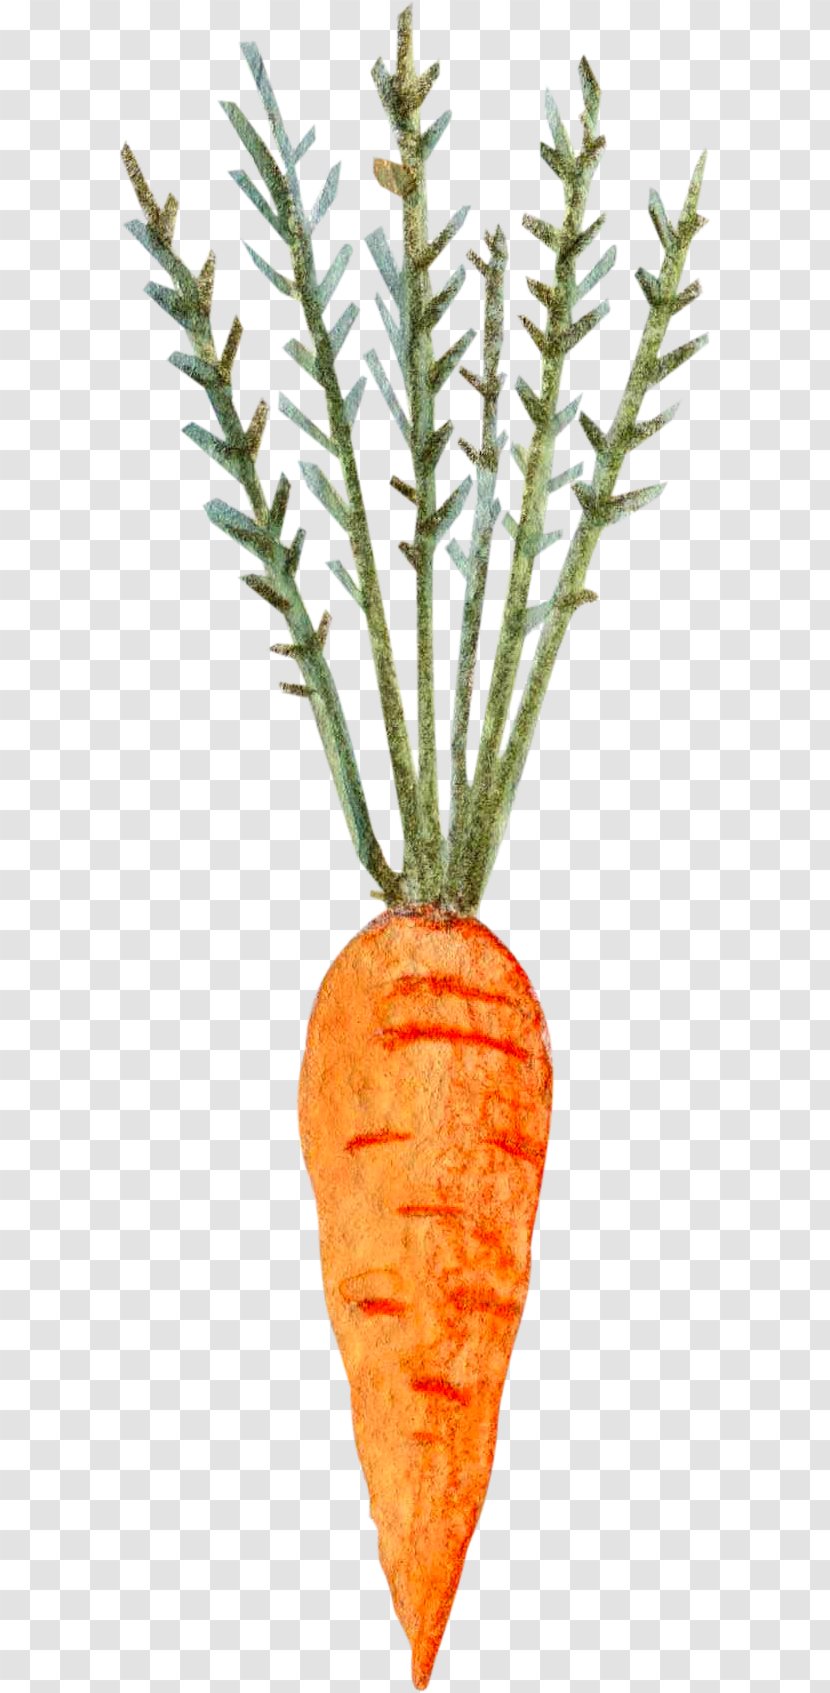 Carrot Vegetable - Ingredient - Hand Painted With Leaf Carrots Transparent PNG